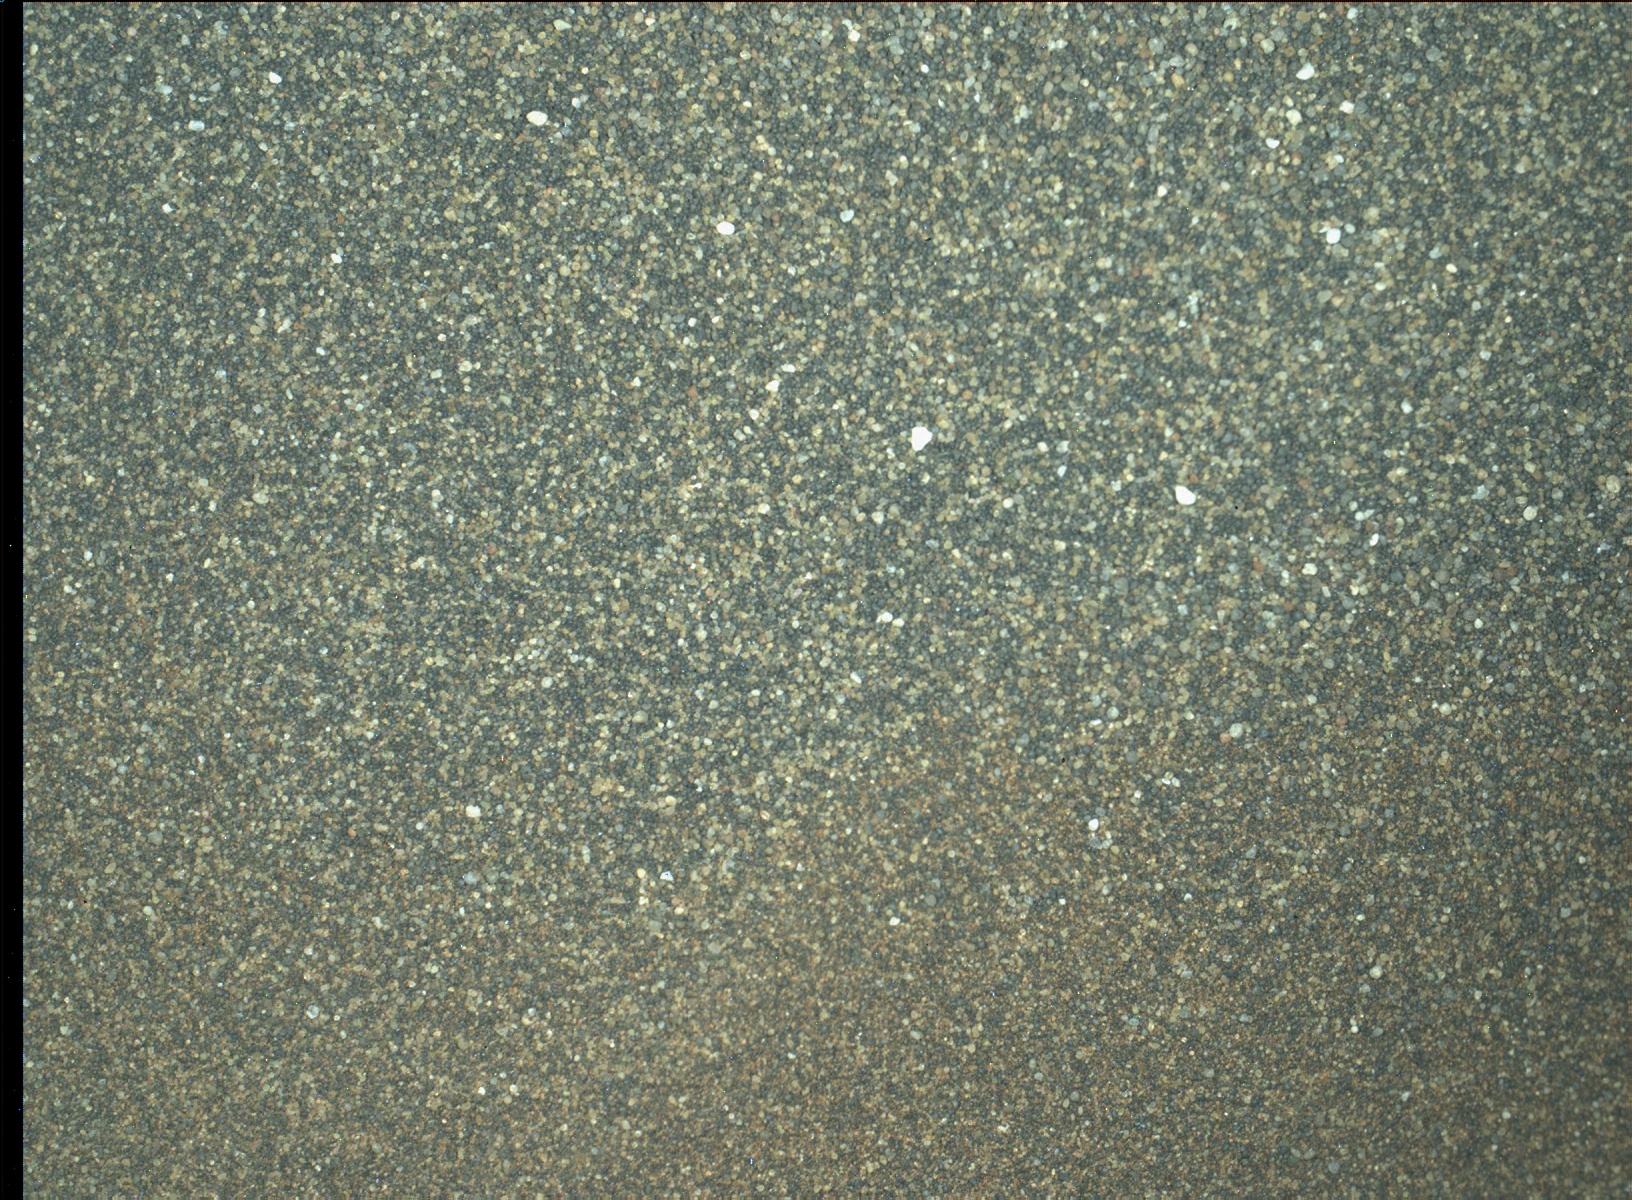 Nasa's Mars rover Curiosity acquired this image using its Mars Hand Lens Imager (MAHLI) on Sol 1230